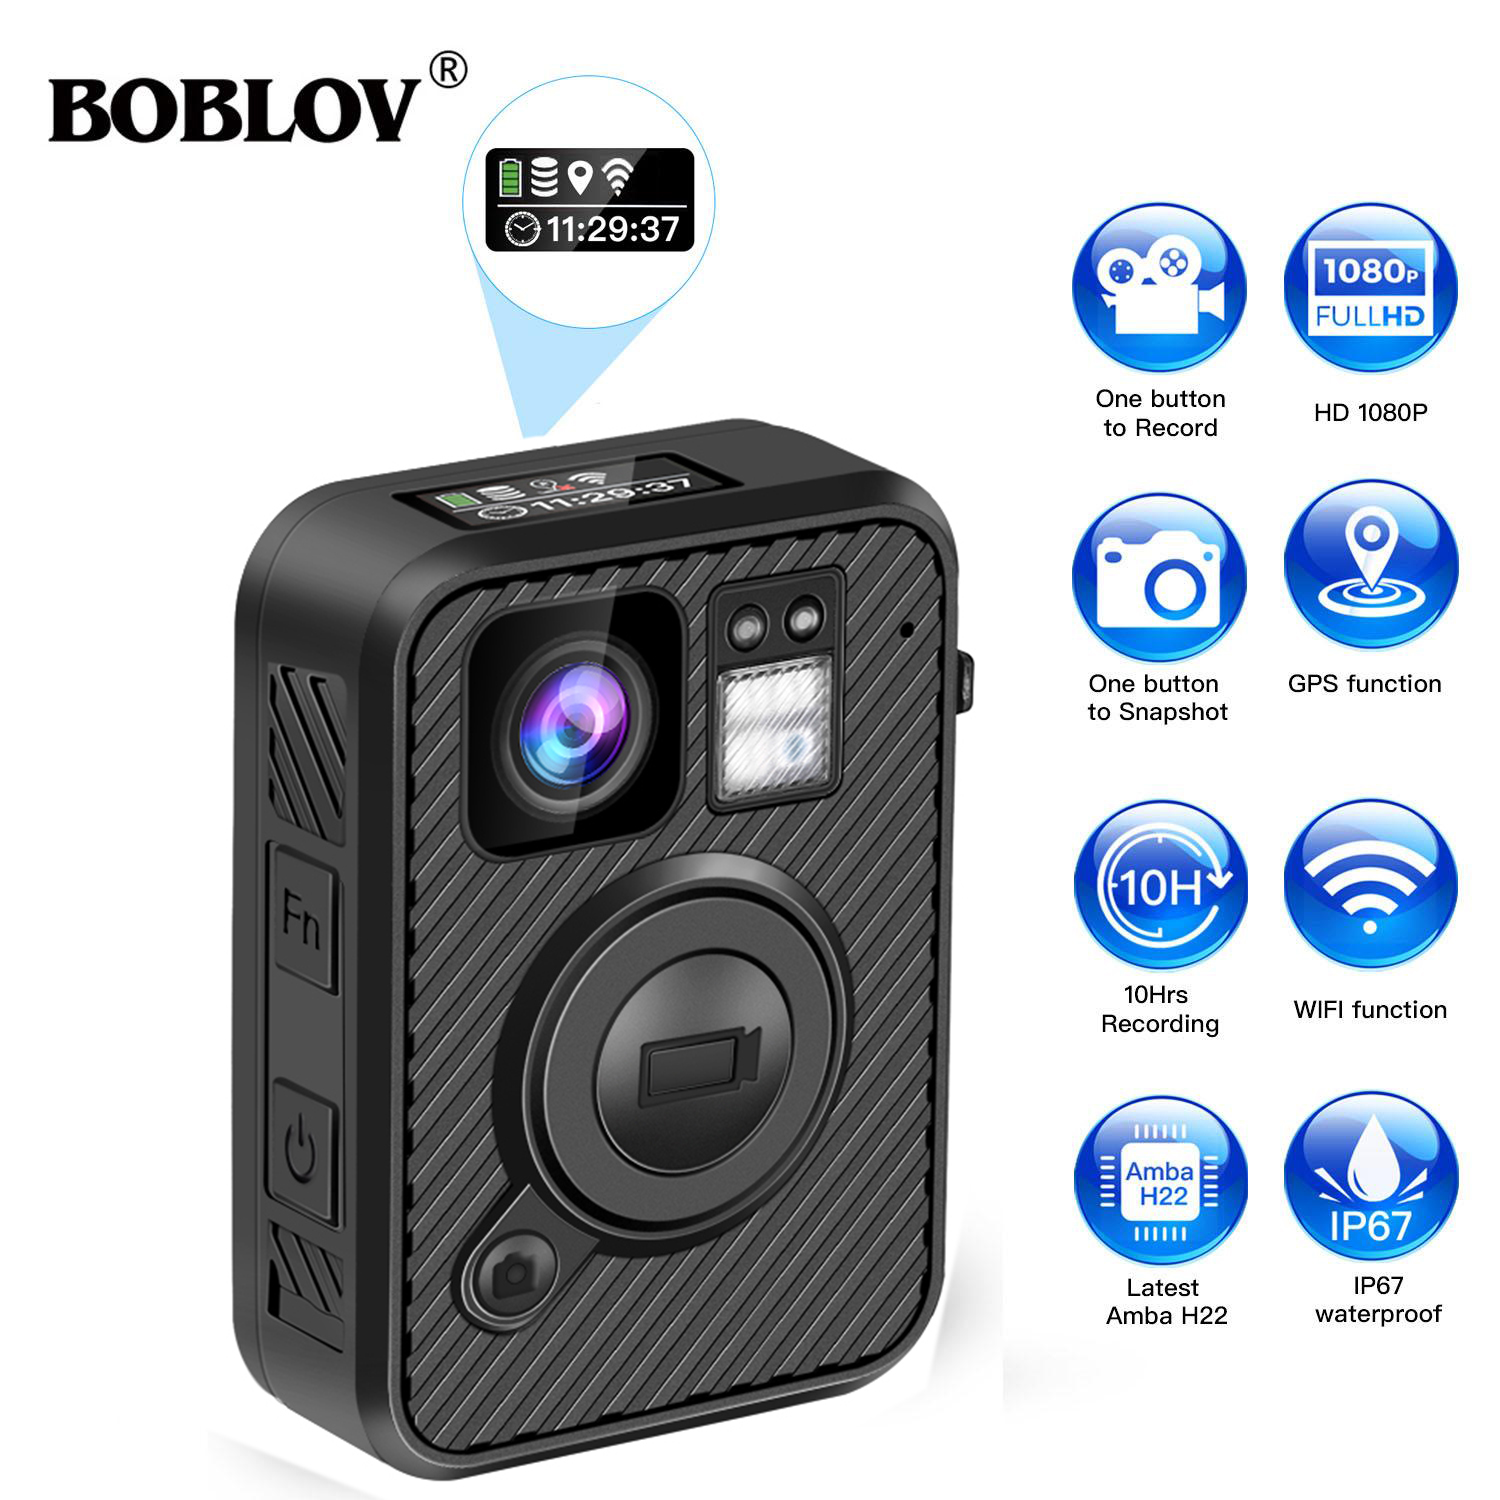 BOBLOV F1 Body Camera 64G 2K 1440P GPS No WiFi Version Police Body Camera One Big Button for 10Hs Recording Night Vision Camcorder with .66inch Screen 